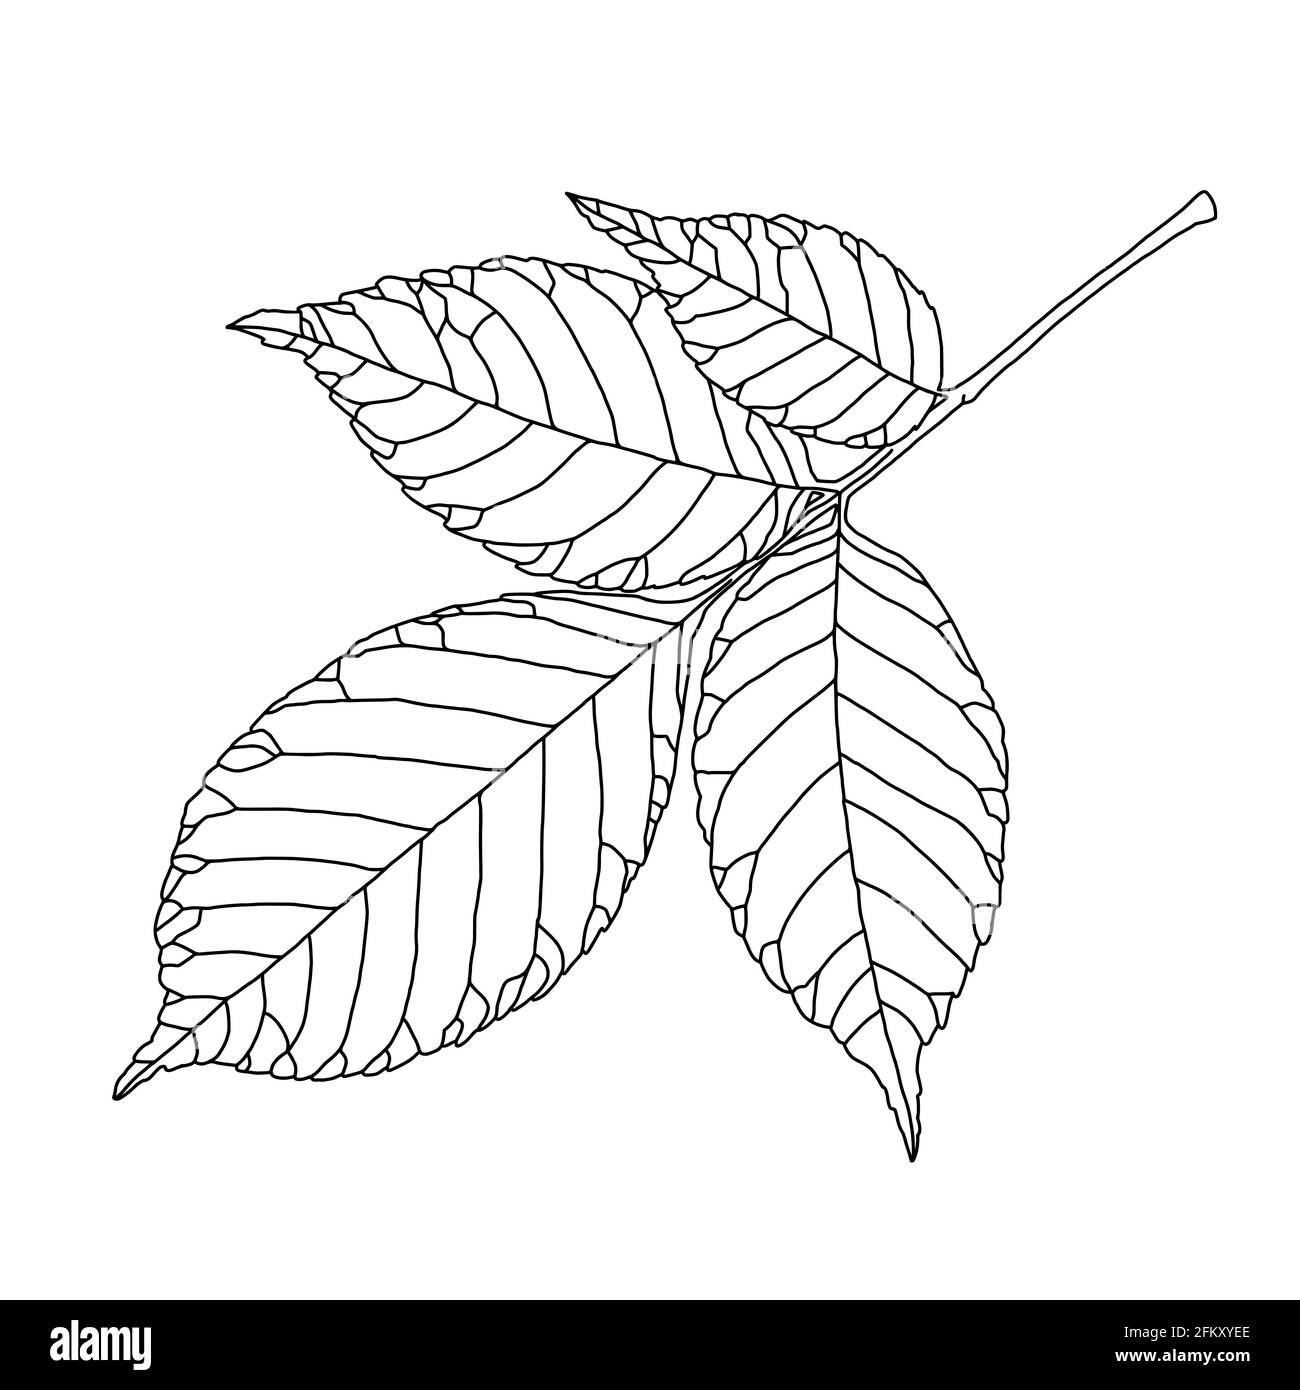 Ash tree leaf line drawing with decorative veining isolated on white background. Vector illustration. Design element for coloring book, card, invitati Stock Vector